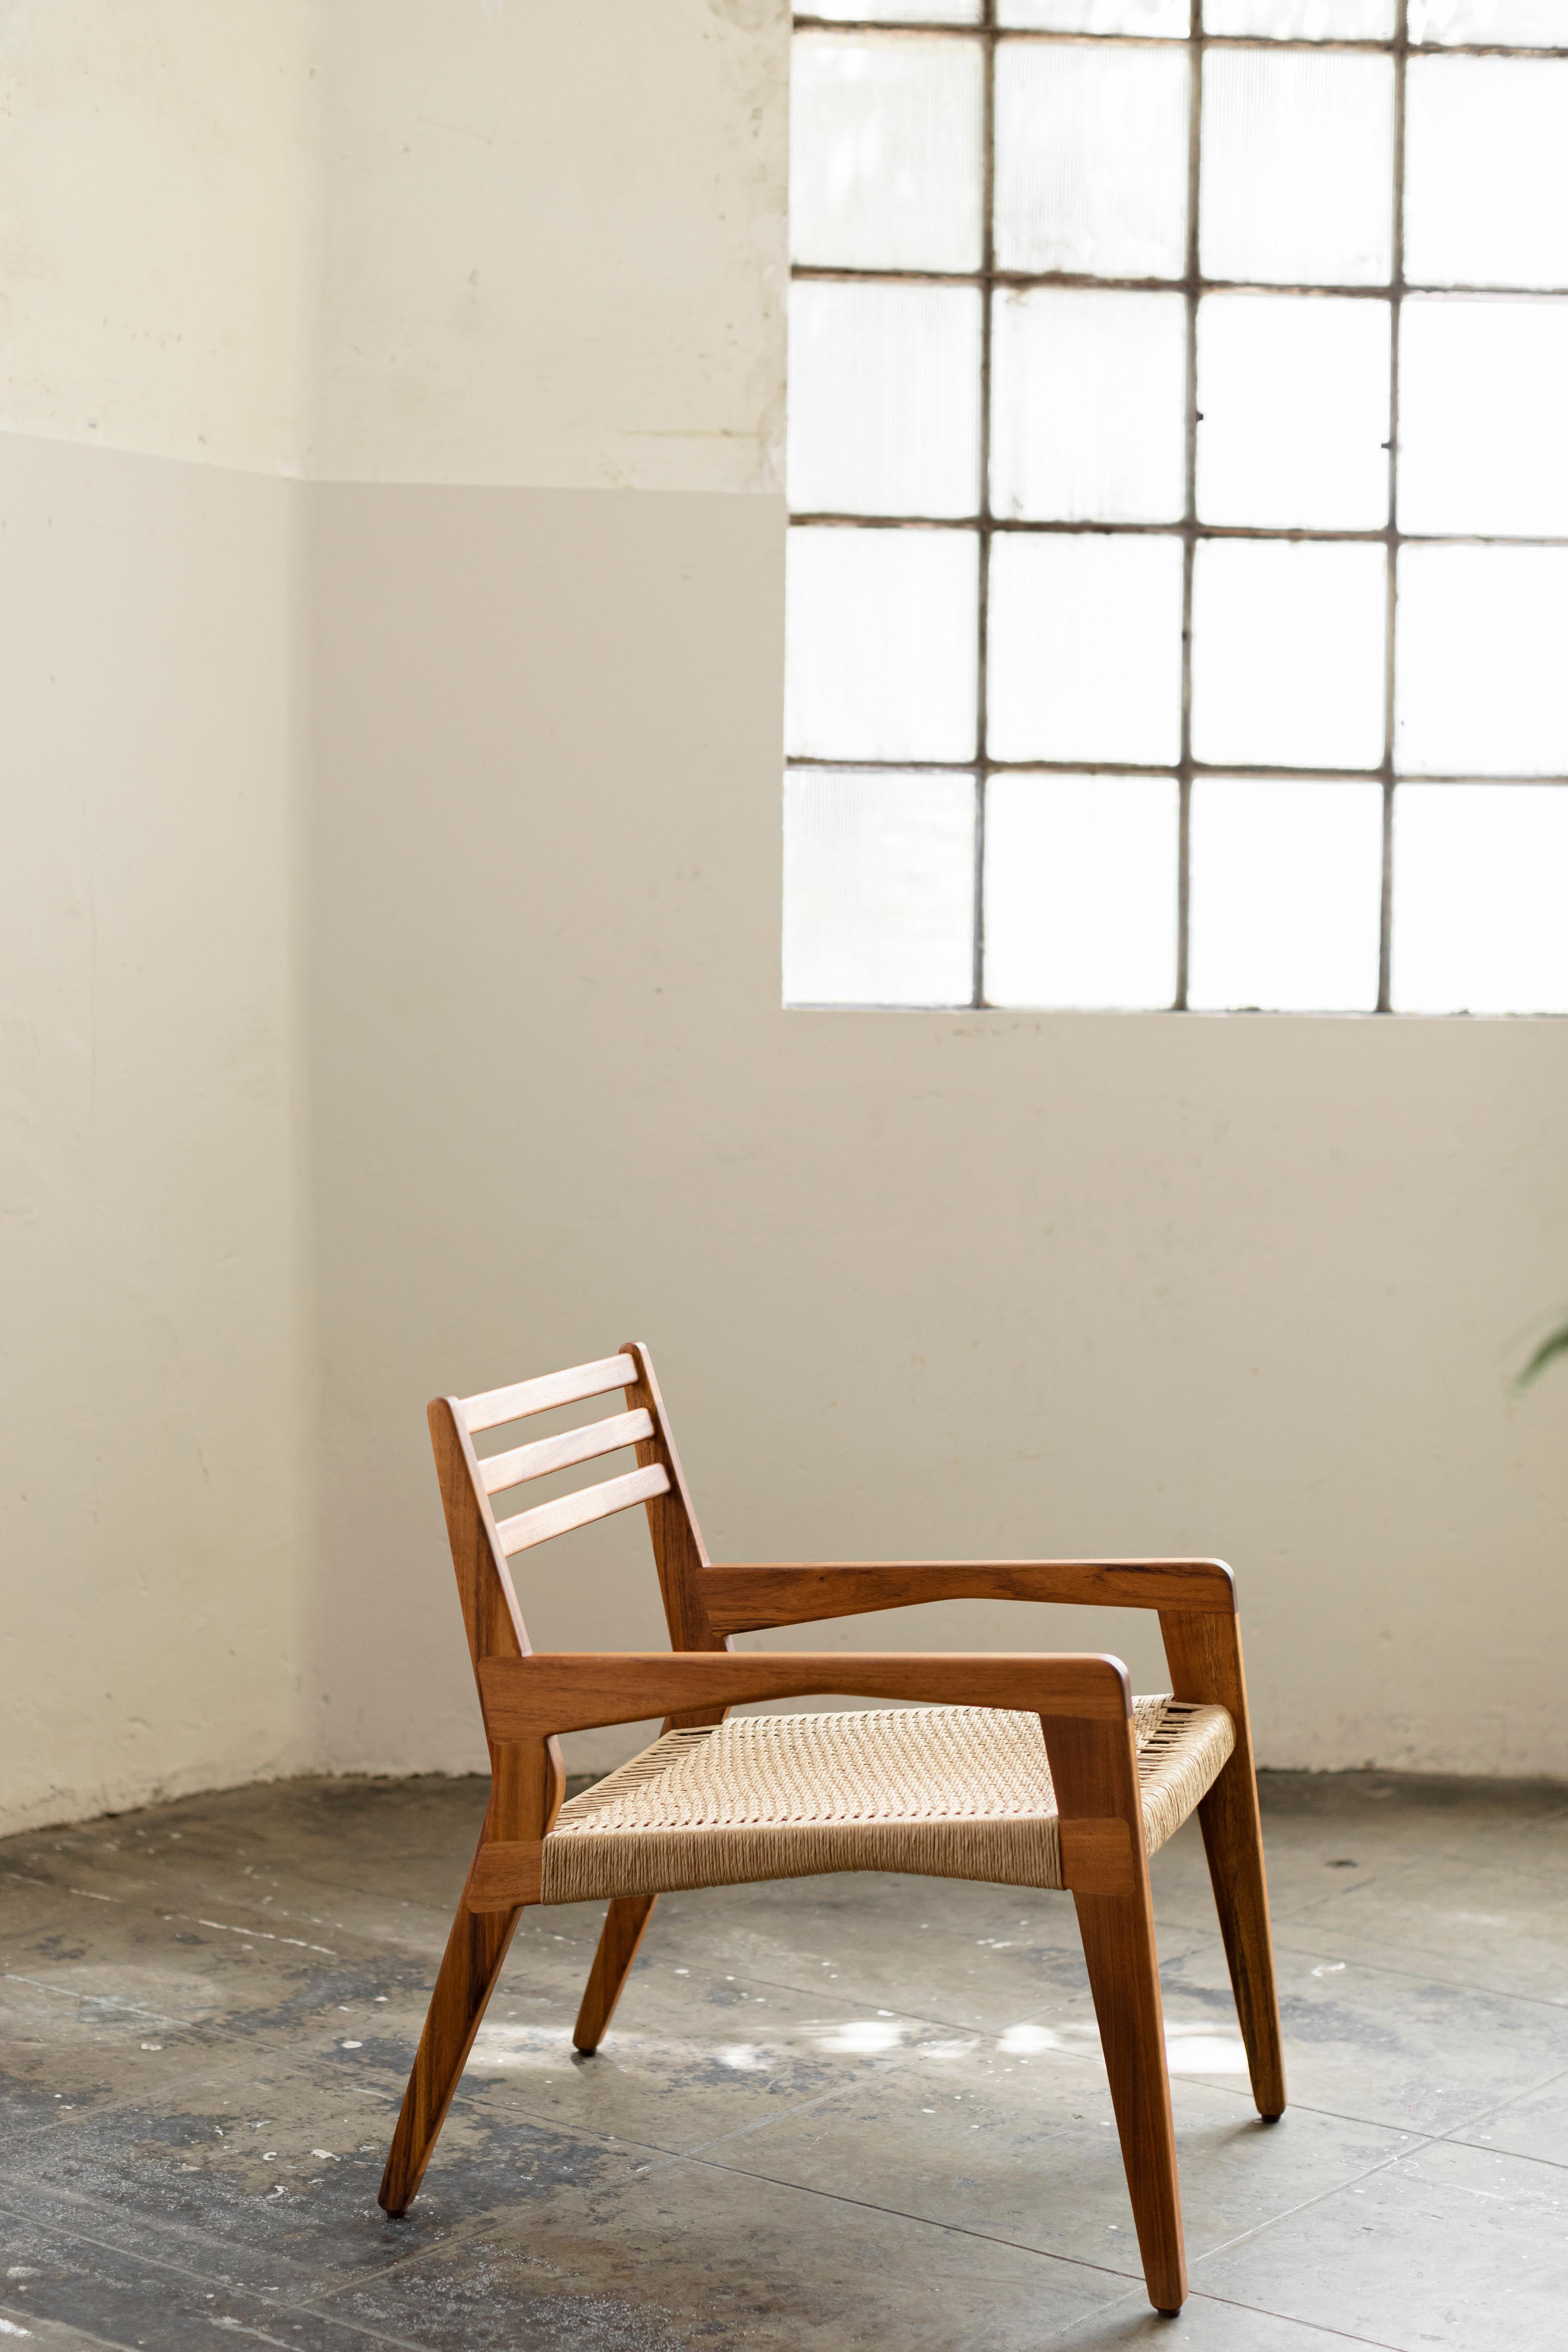 Wooden lounge chair C Collection made of oak or tzalam wood handwoven with paper cord, jute or piola.